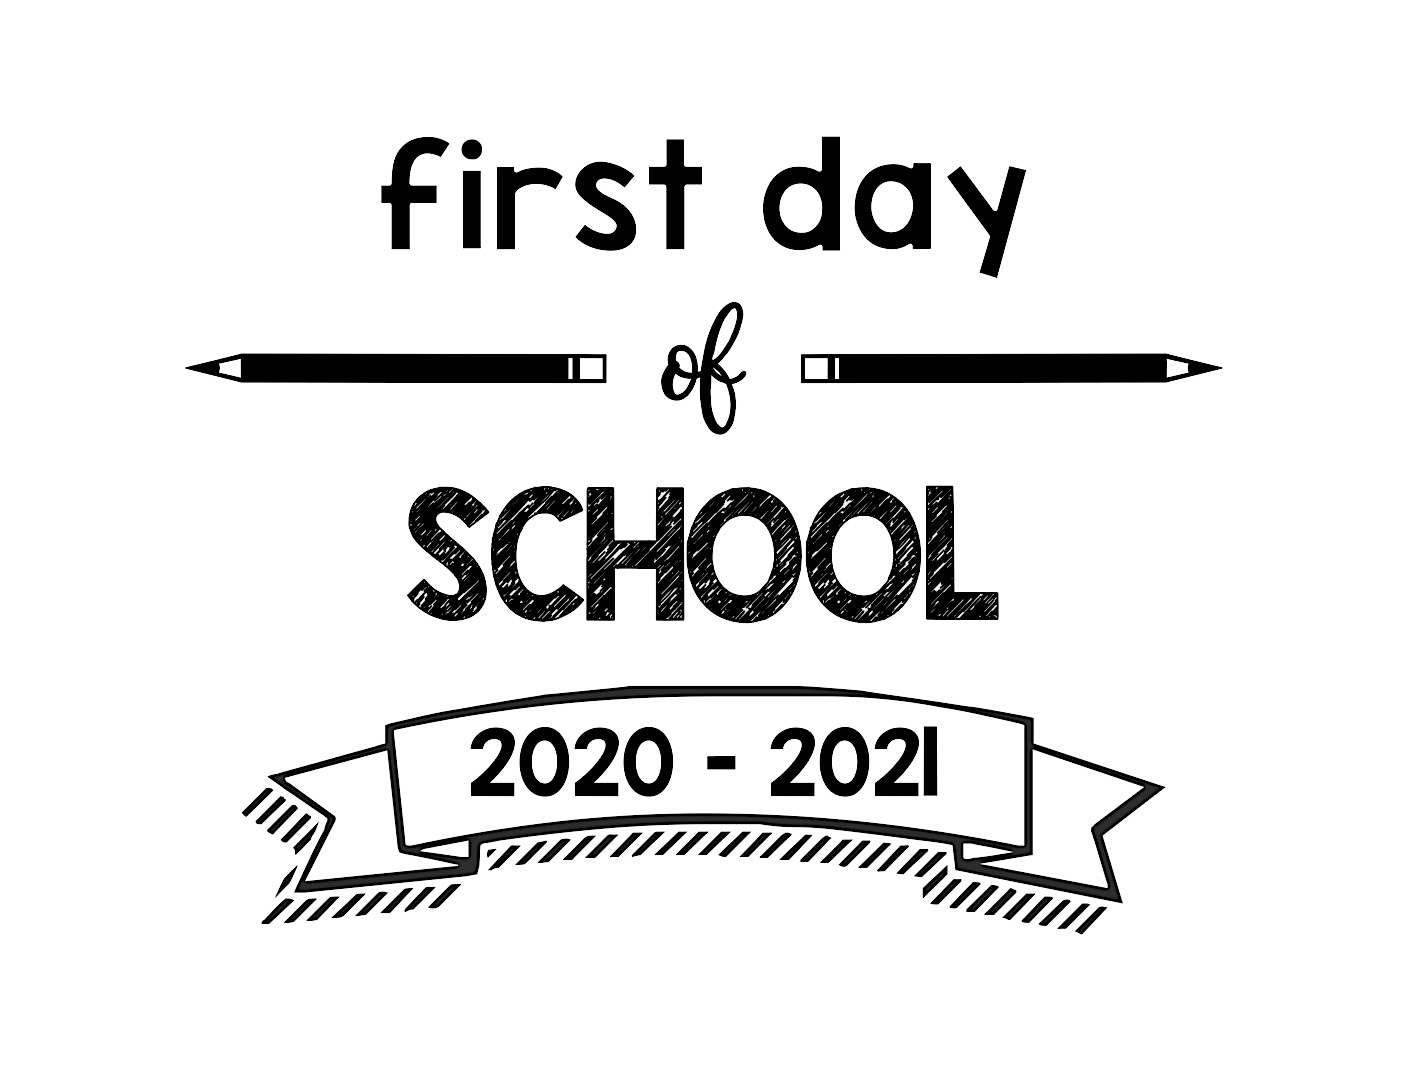 first-day-of-school-2020-2021-south-lumina-style